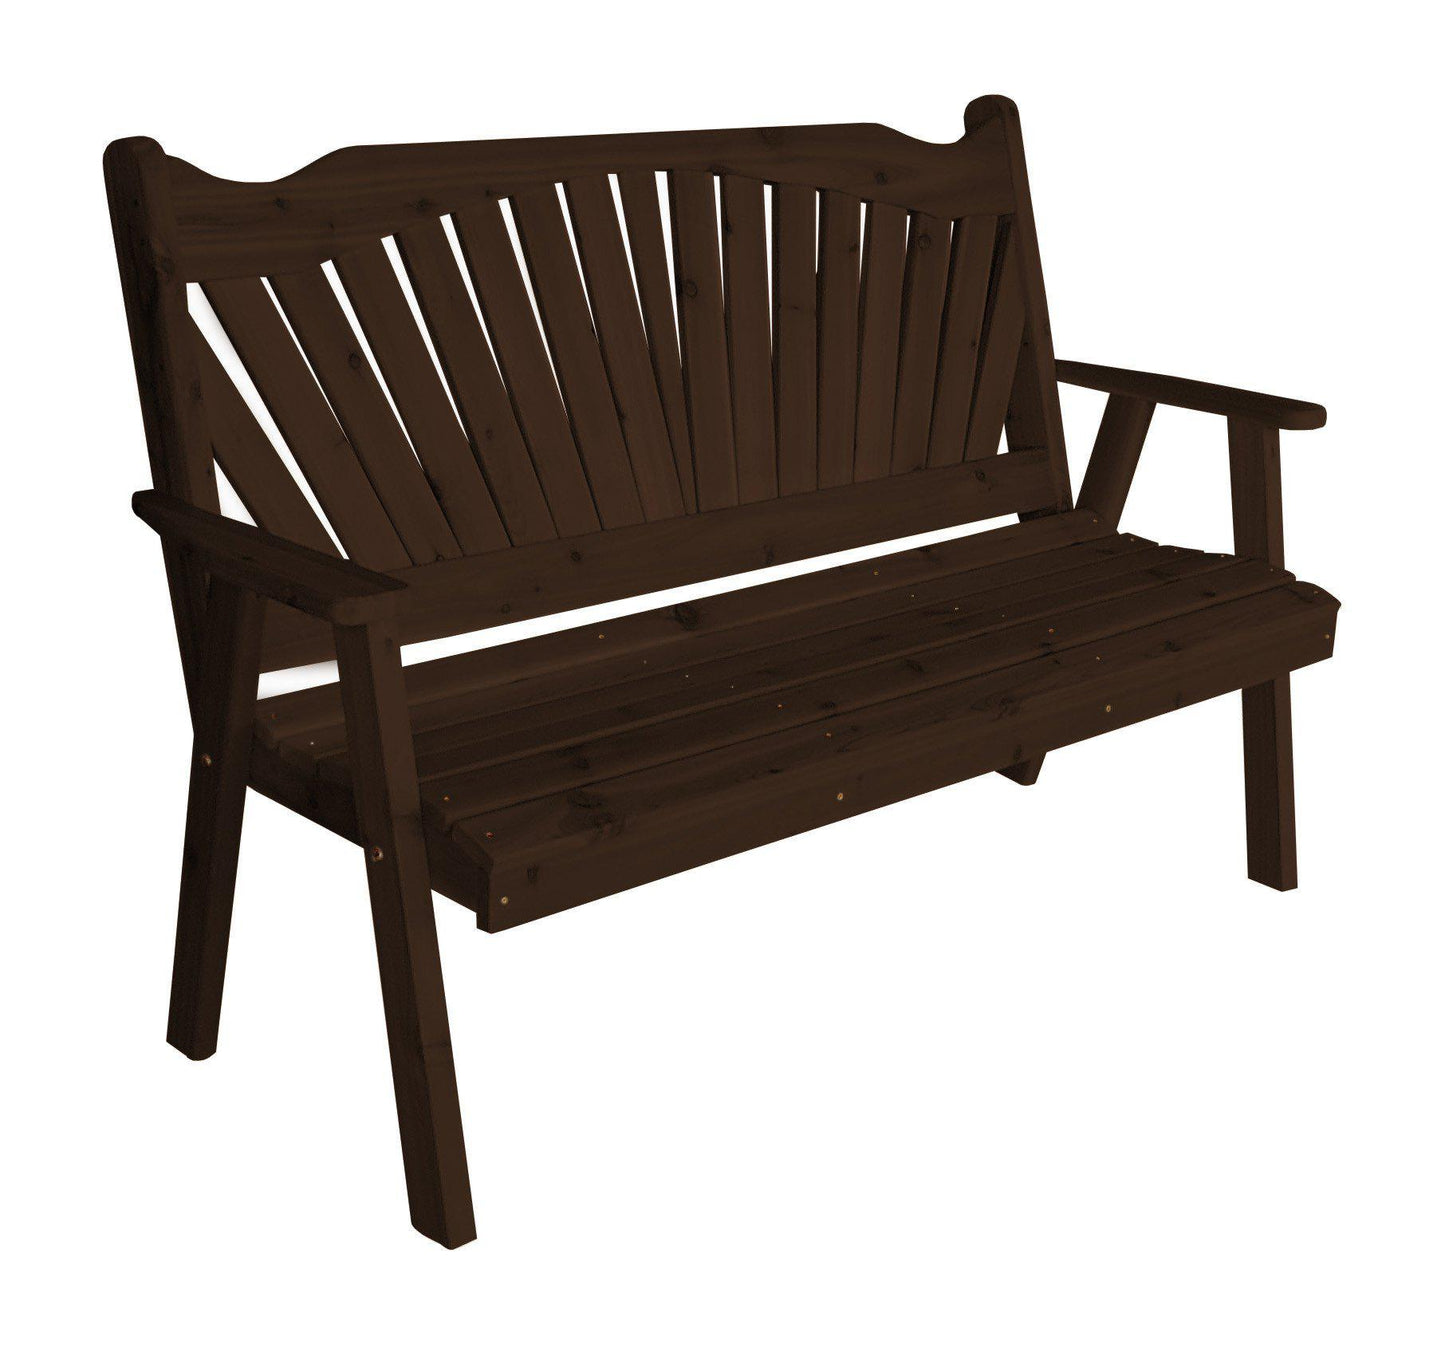 A&L Furniture Co. Western Red Cedar 4' Fanback Garden Bench - LEAD TIME TO SHIP 2 WEEKS